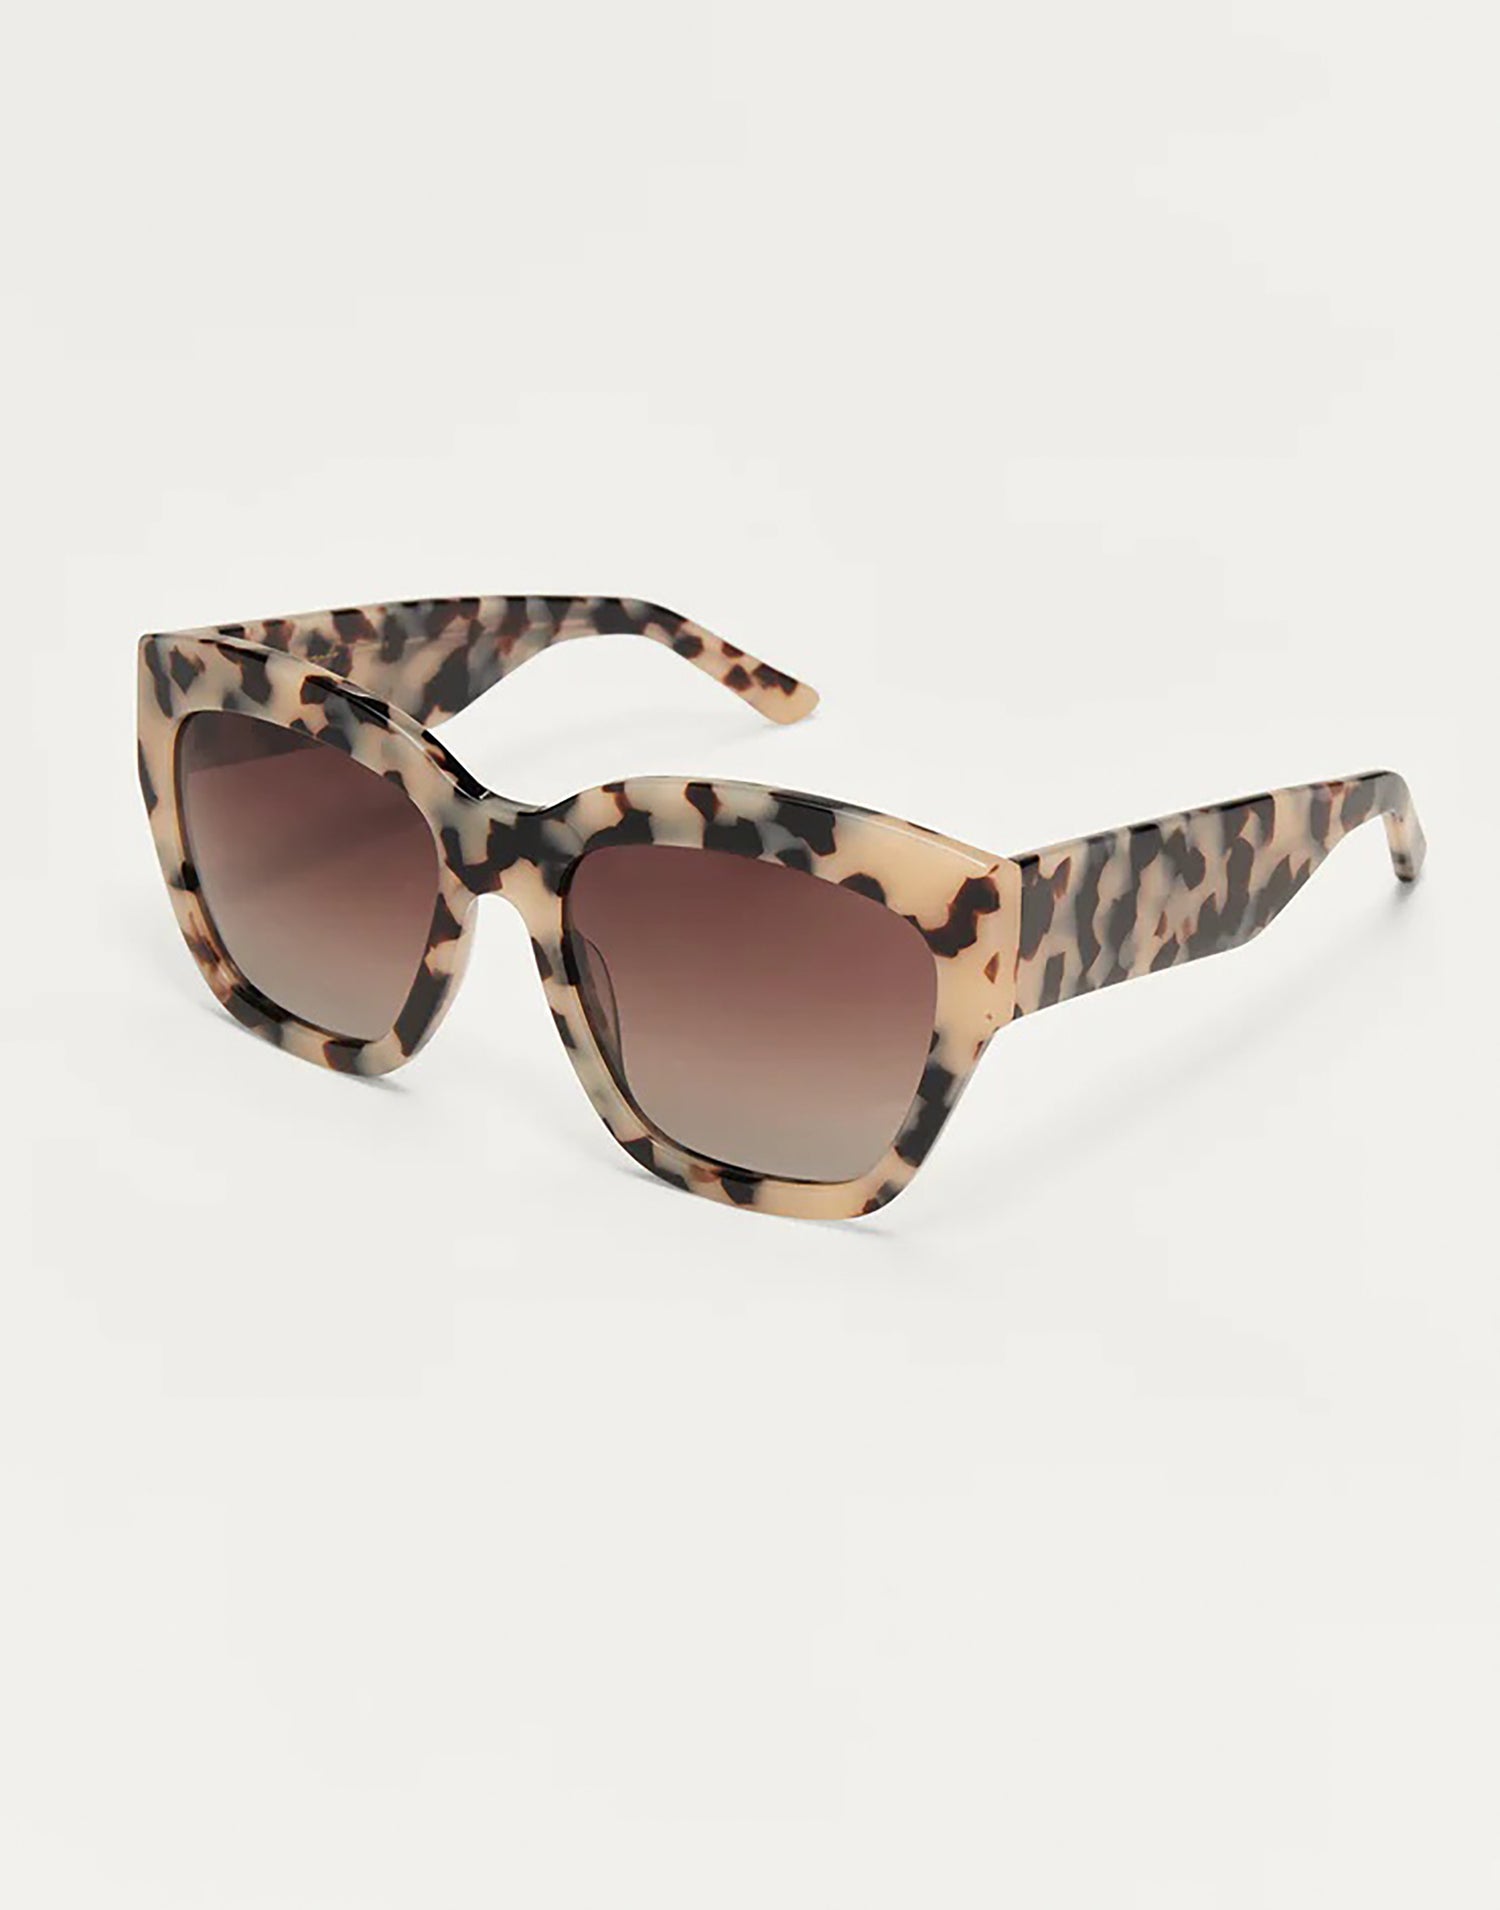 Iconic Sunglasses by Z Supply in Brown Tortoise - Angled View